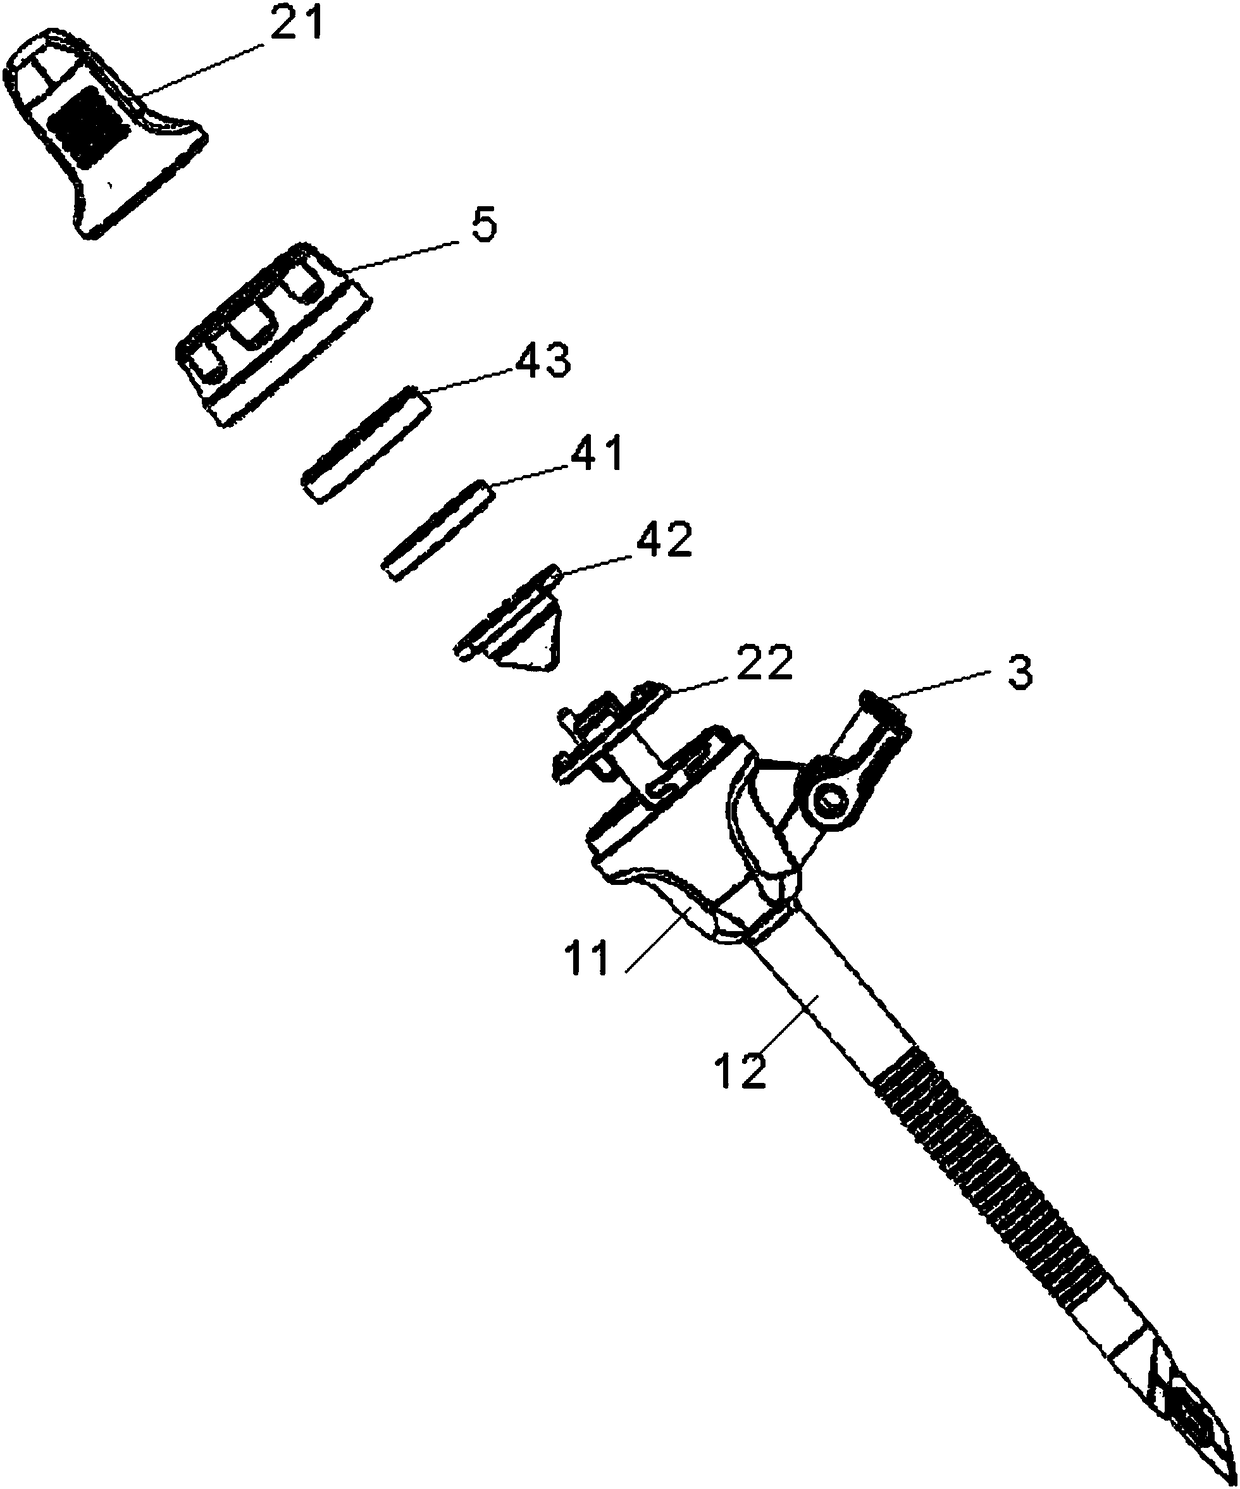 Puncture cannula device of small laparoscope puncture outfit